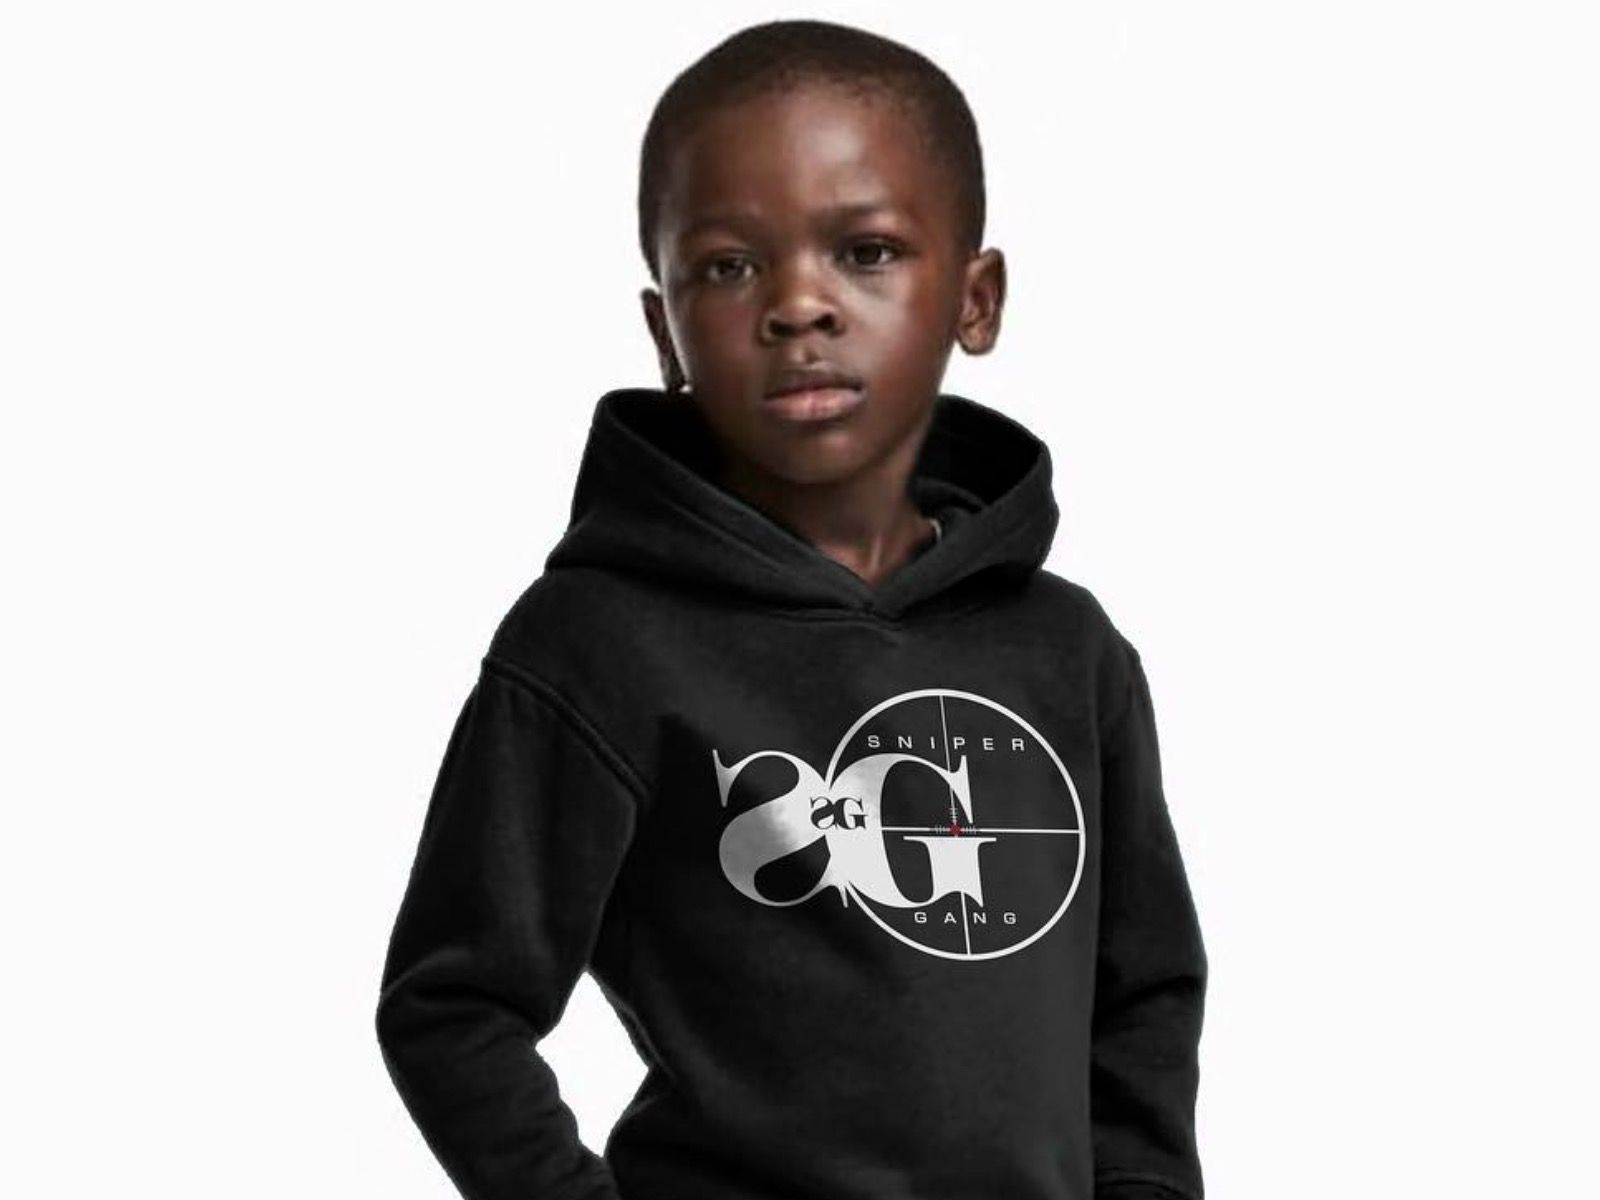 Kodak Black Has The Perfect Clothing Line For The H&M Kid Model